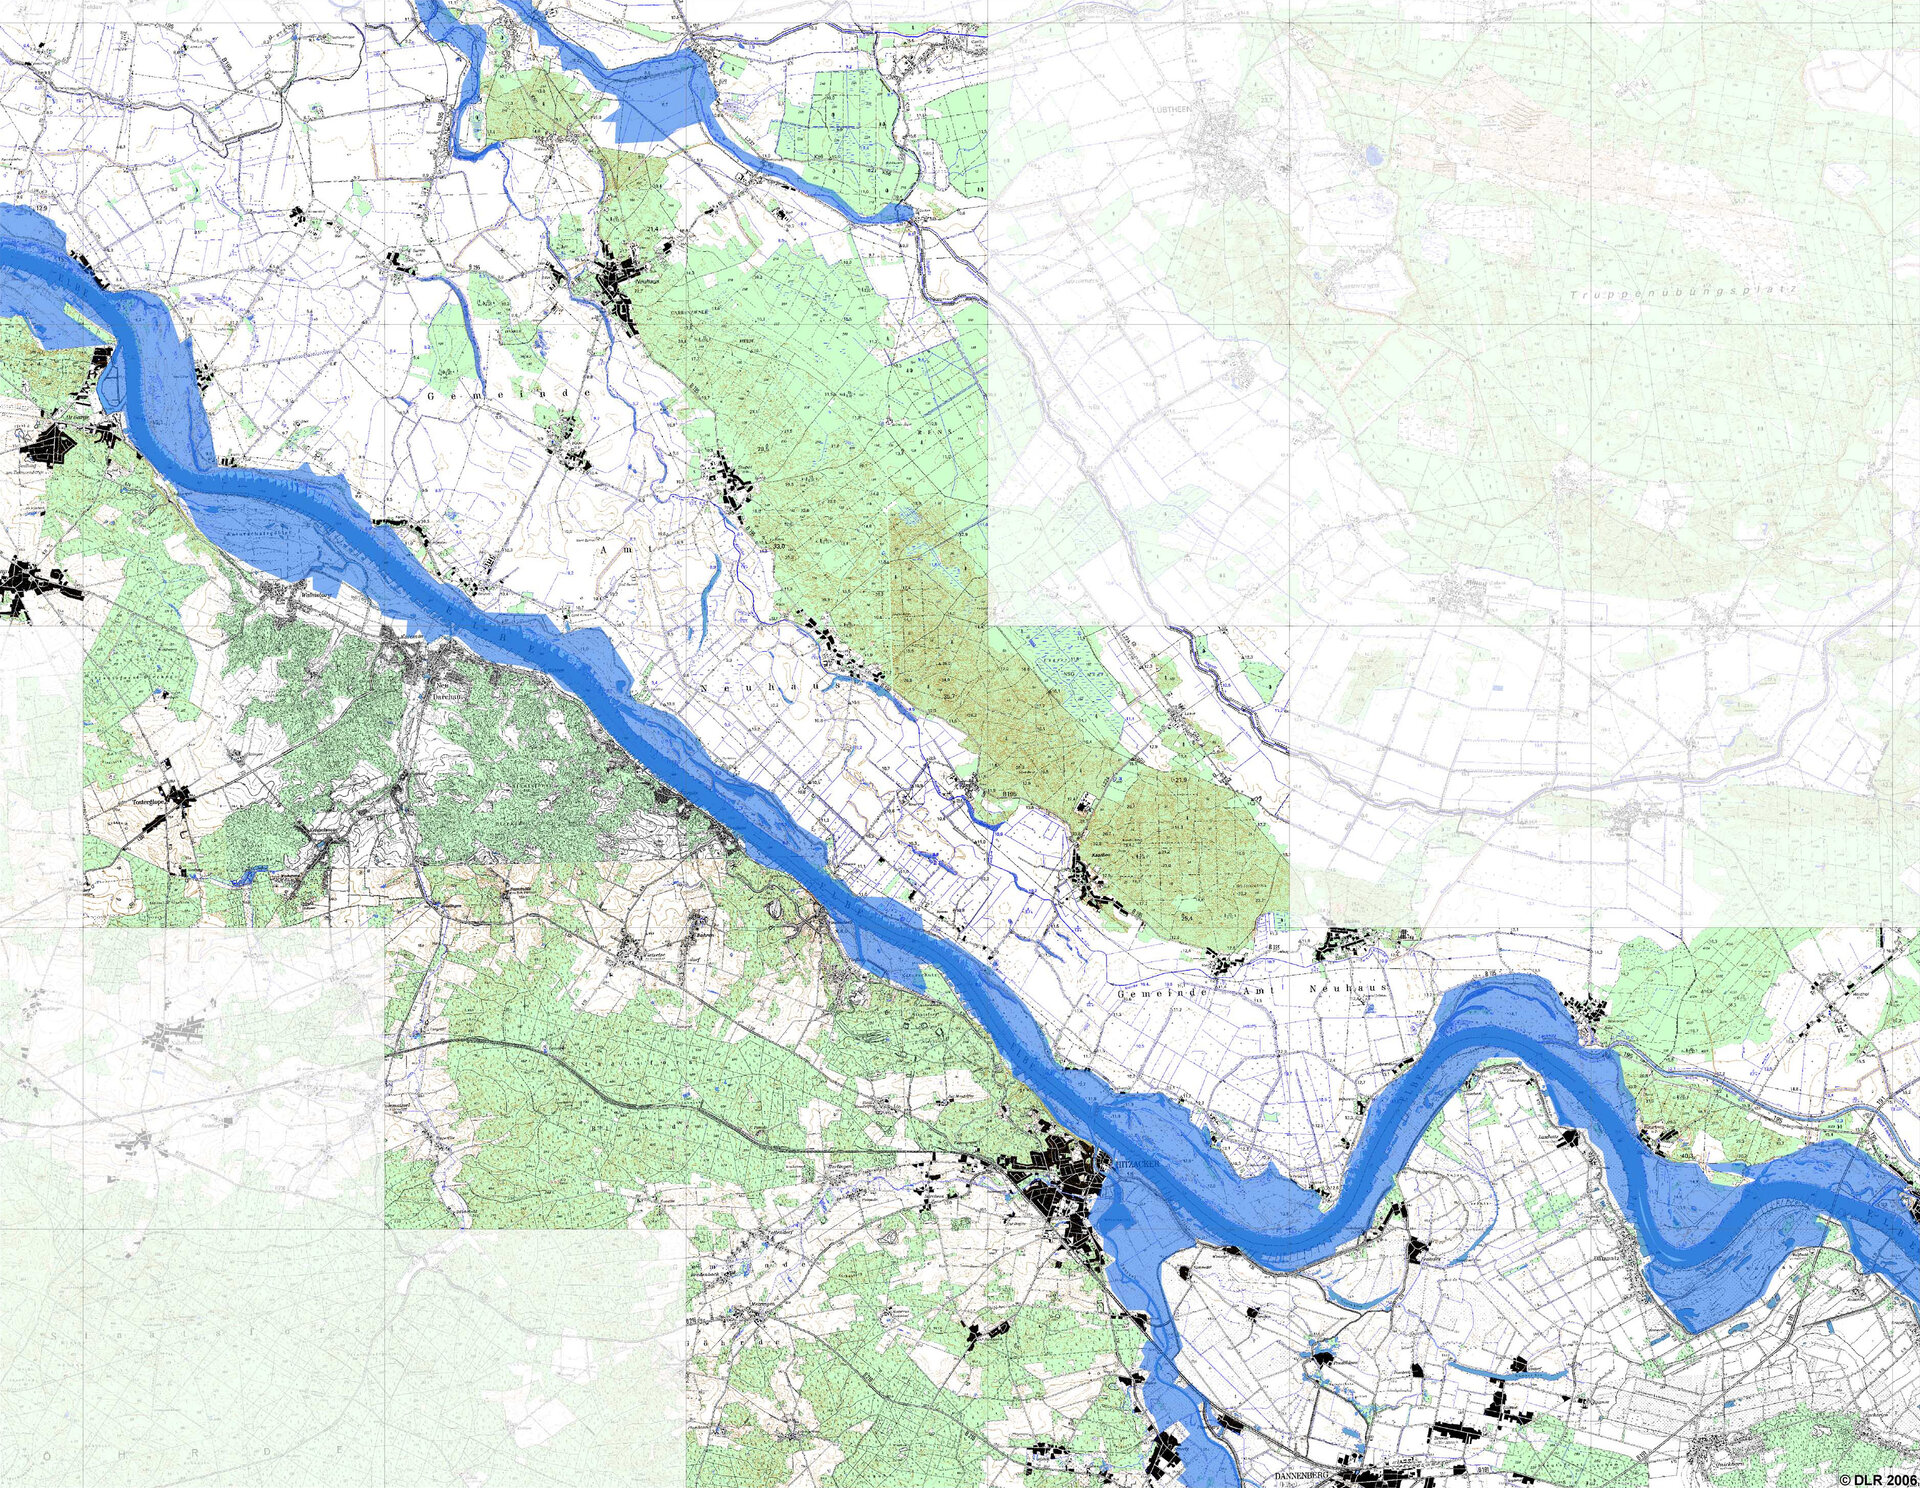 ERS-based topographic map of Elbe flooding